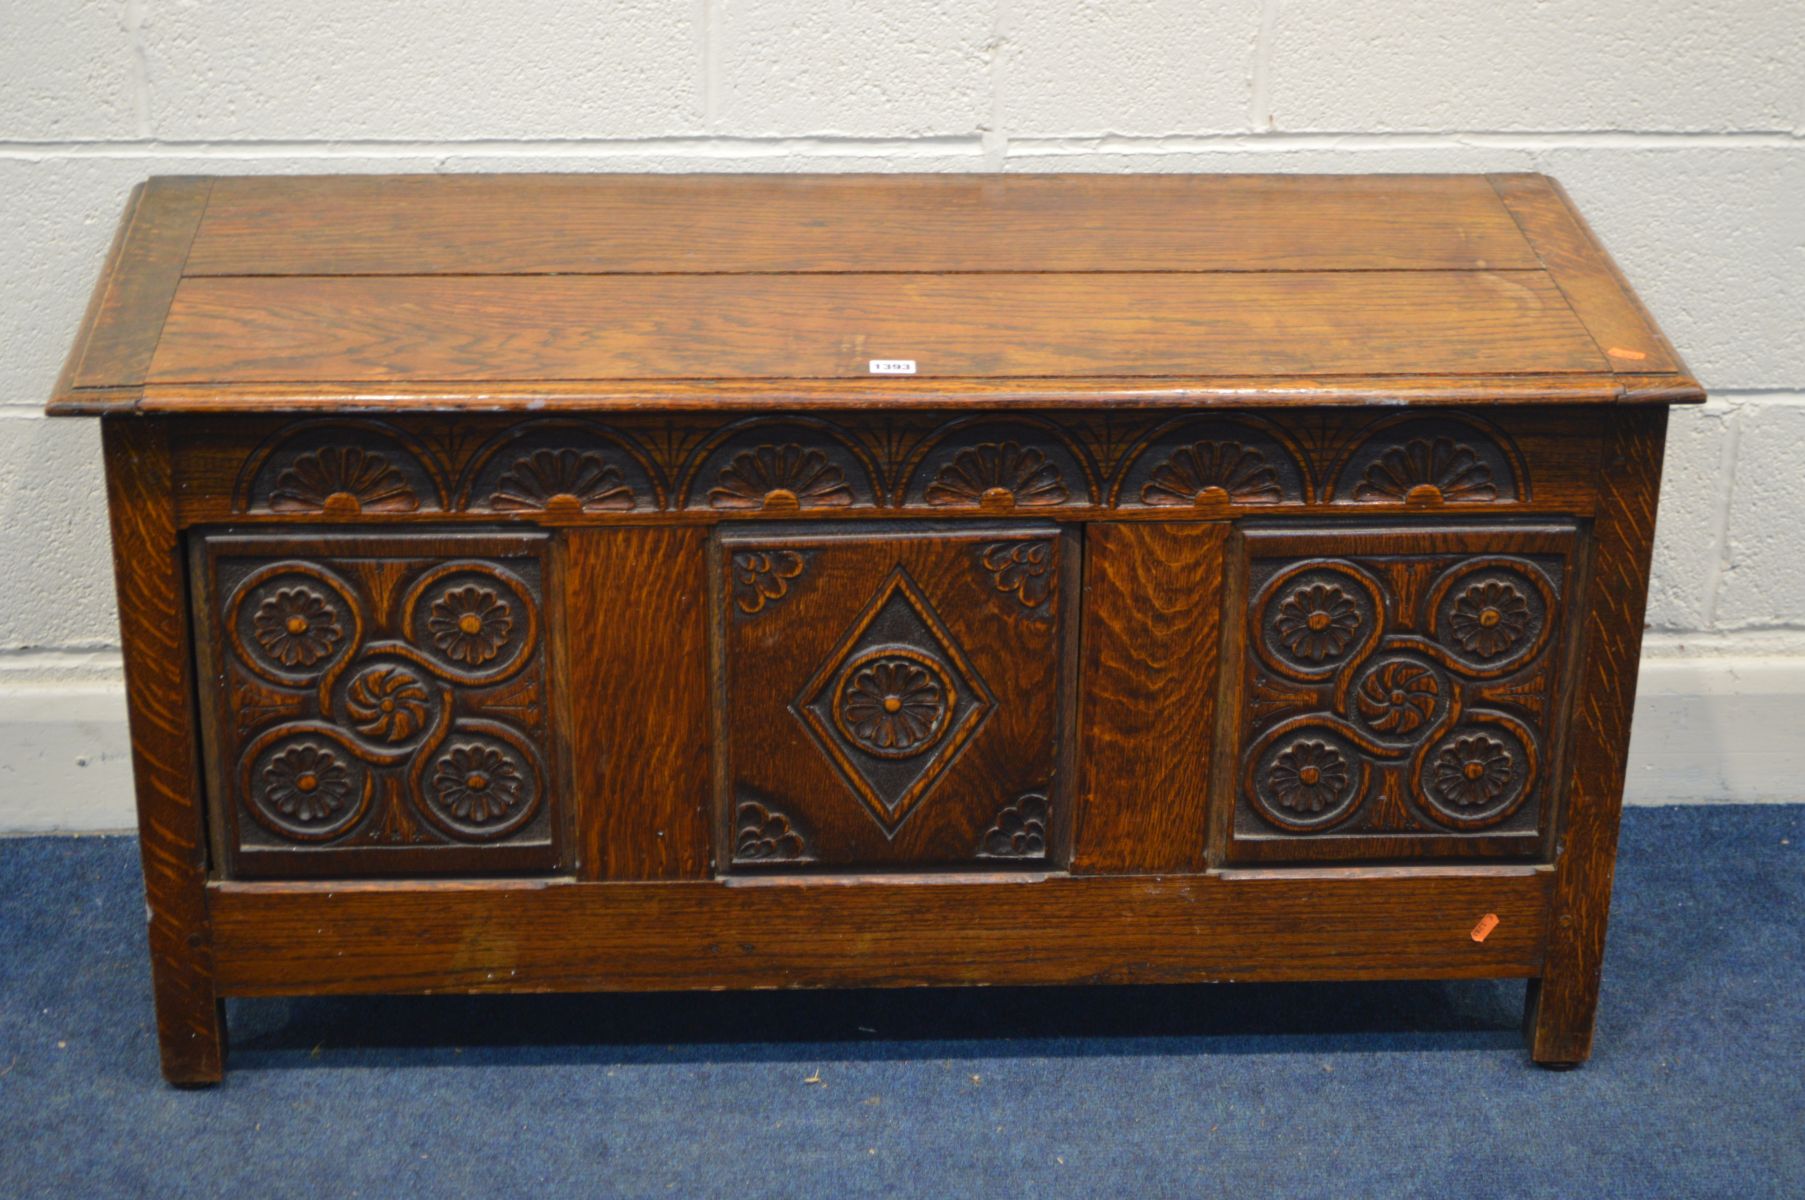 AN EARLY 20TH CENTURY BLANKET CHEST, with a lunette detail frieze above a triple panel front bearing